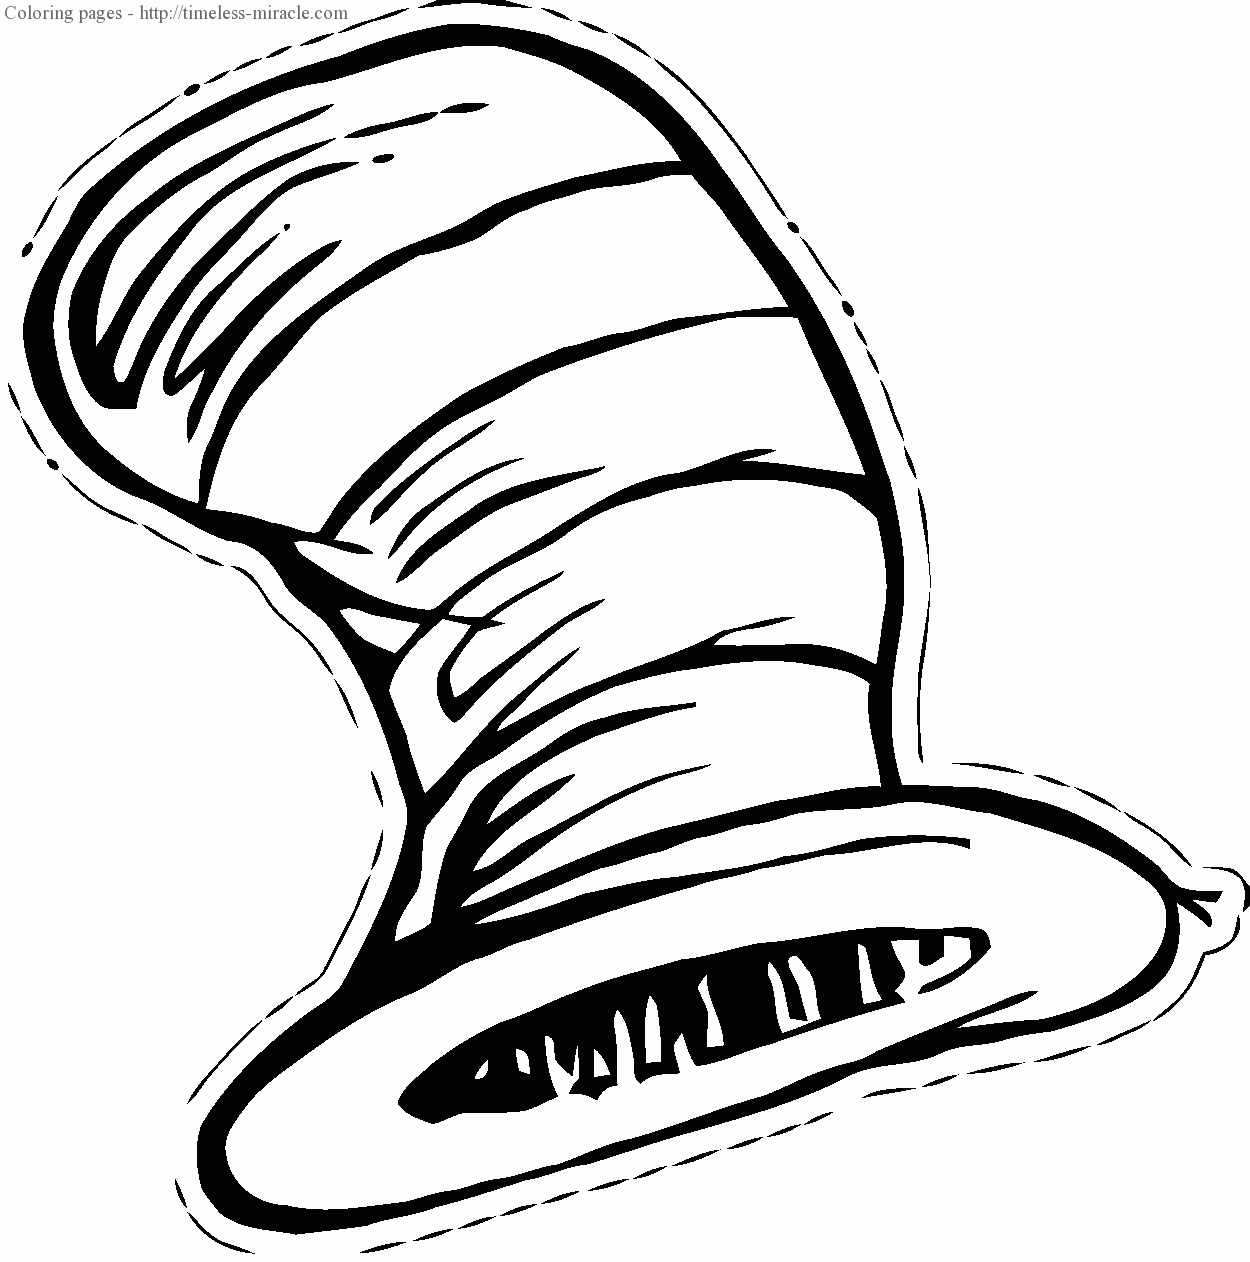 Cat In The Hat Coloring Page Dr Seuss Coloring Pages Cat In The Hat Drawing Dr Seuss Cat